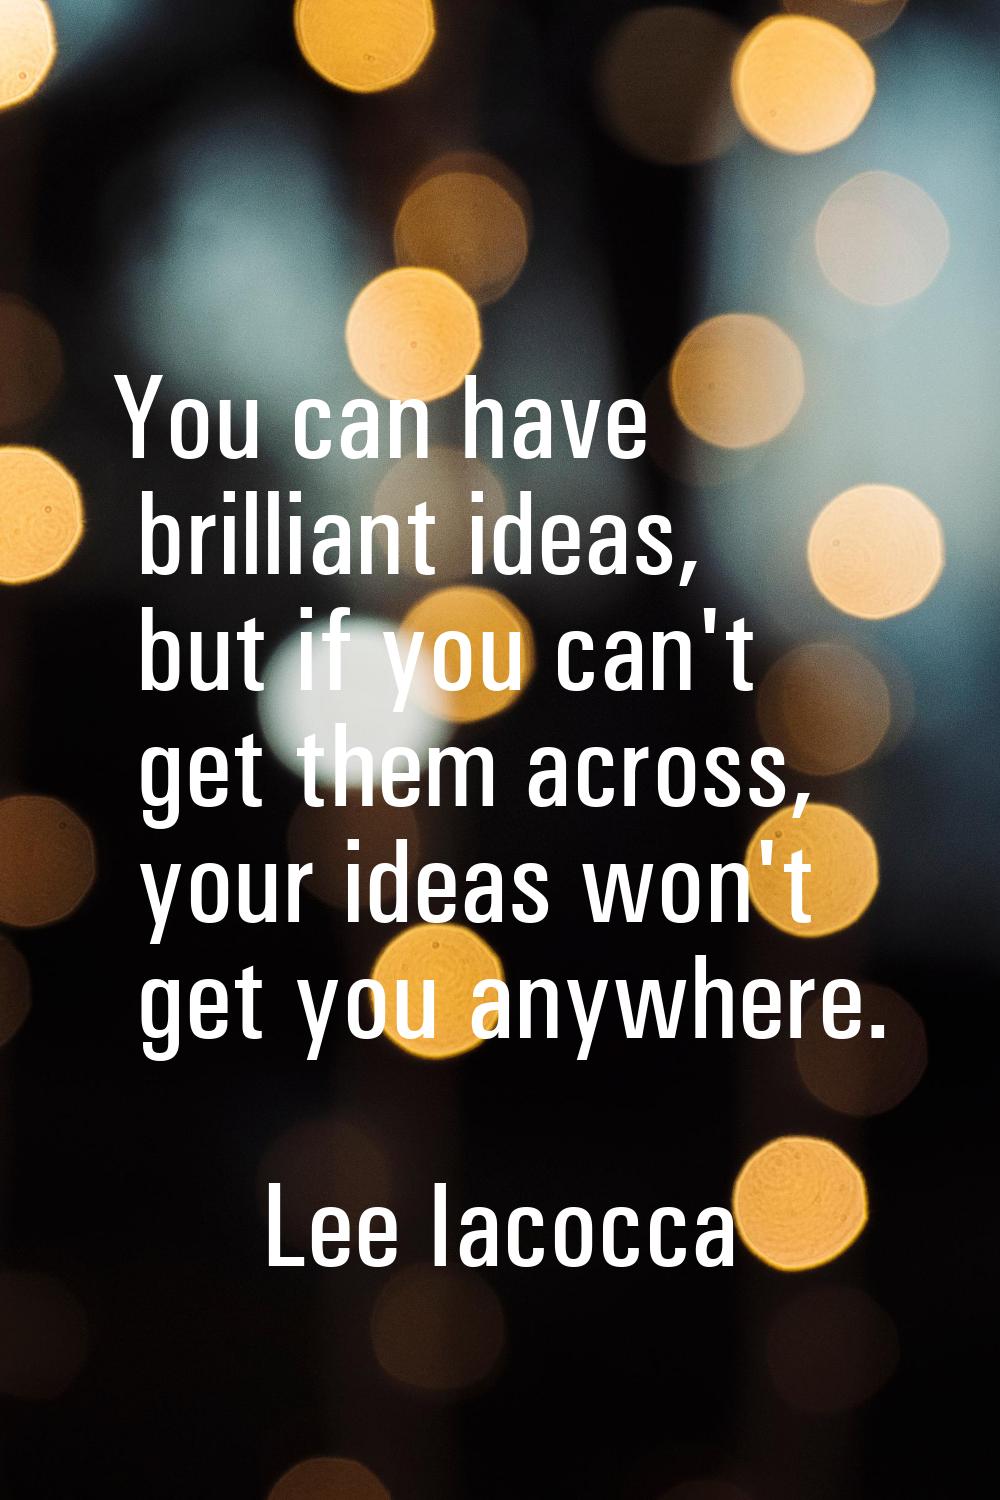 You can have brilliant ideas, but if you can't get them across, your ideas won't get you anywhere.